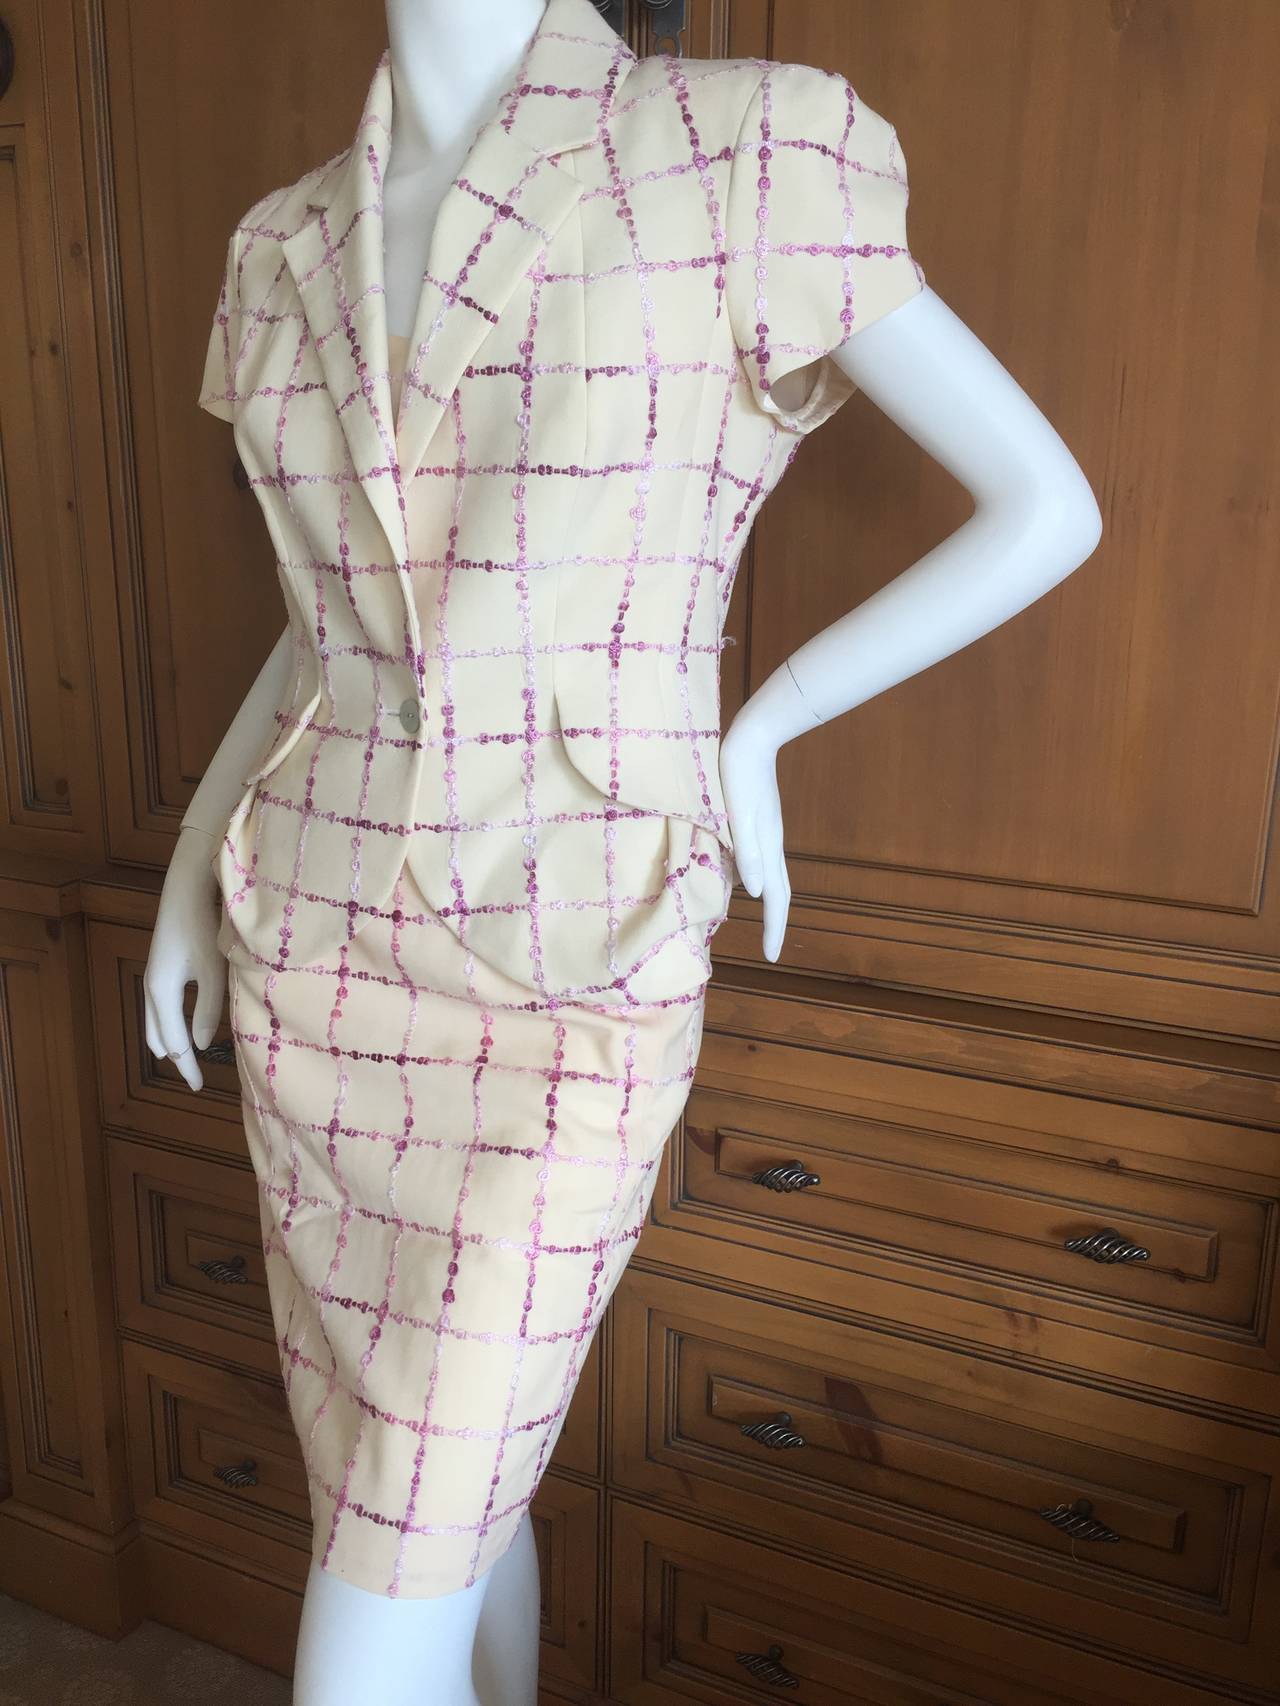 John Galliano vintage dress and matching jacket , from Bergdorf Goodman.
Romantic small floral embroidery, creating a windowpane pattern
This is an earlier Galliano, mid 90's , so pretty and ladylike.
French size 42
Bust 38